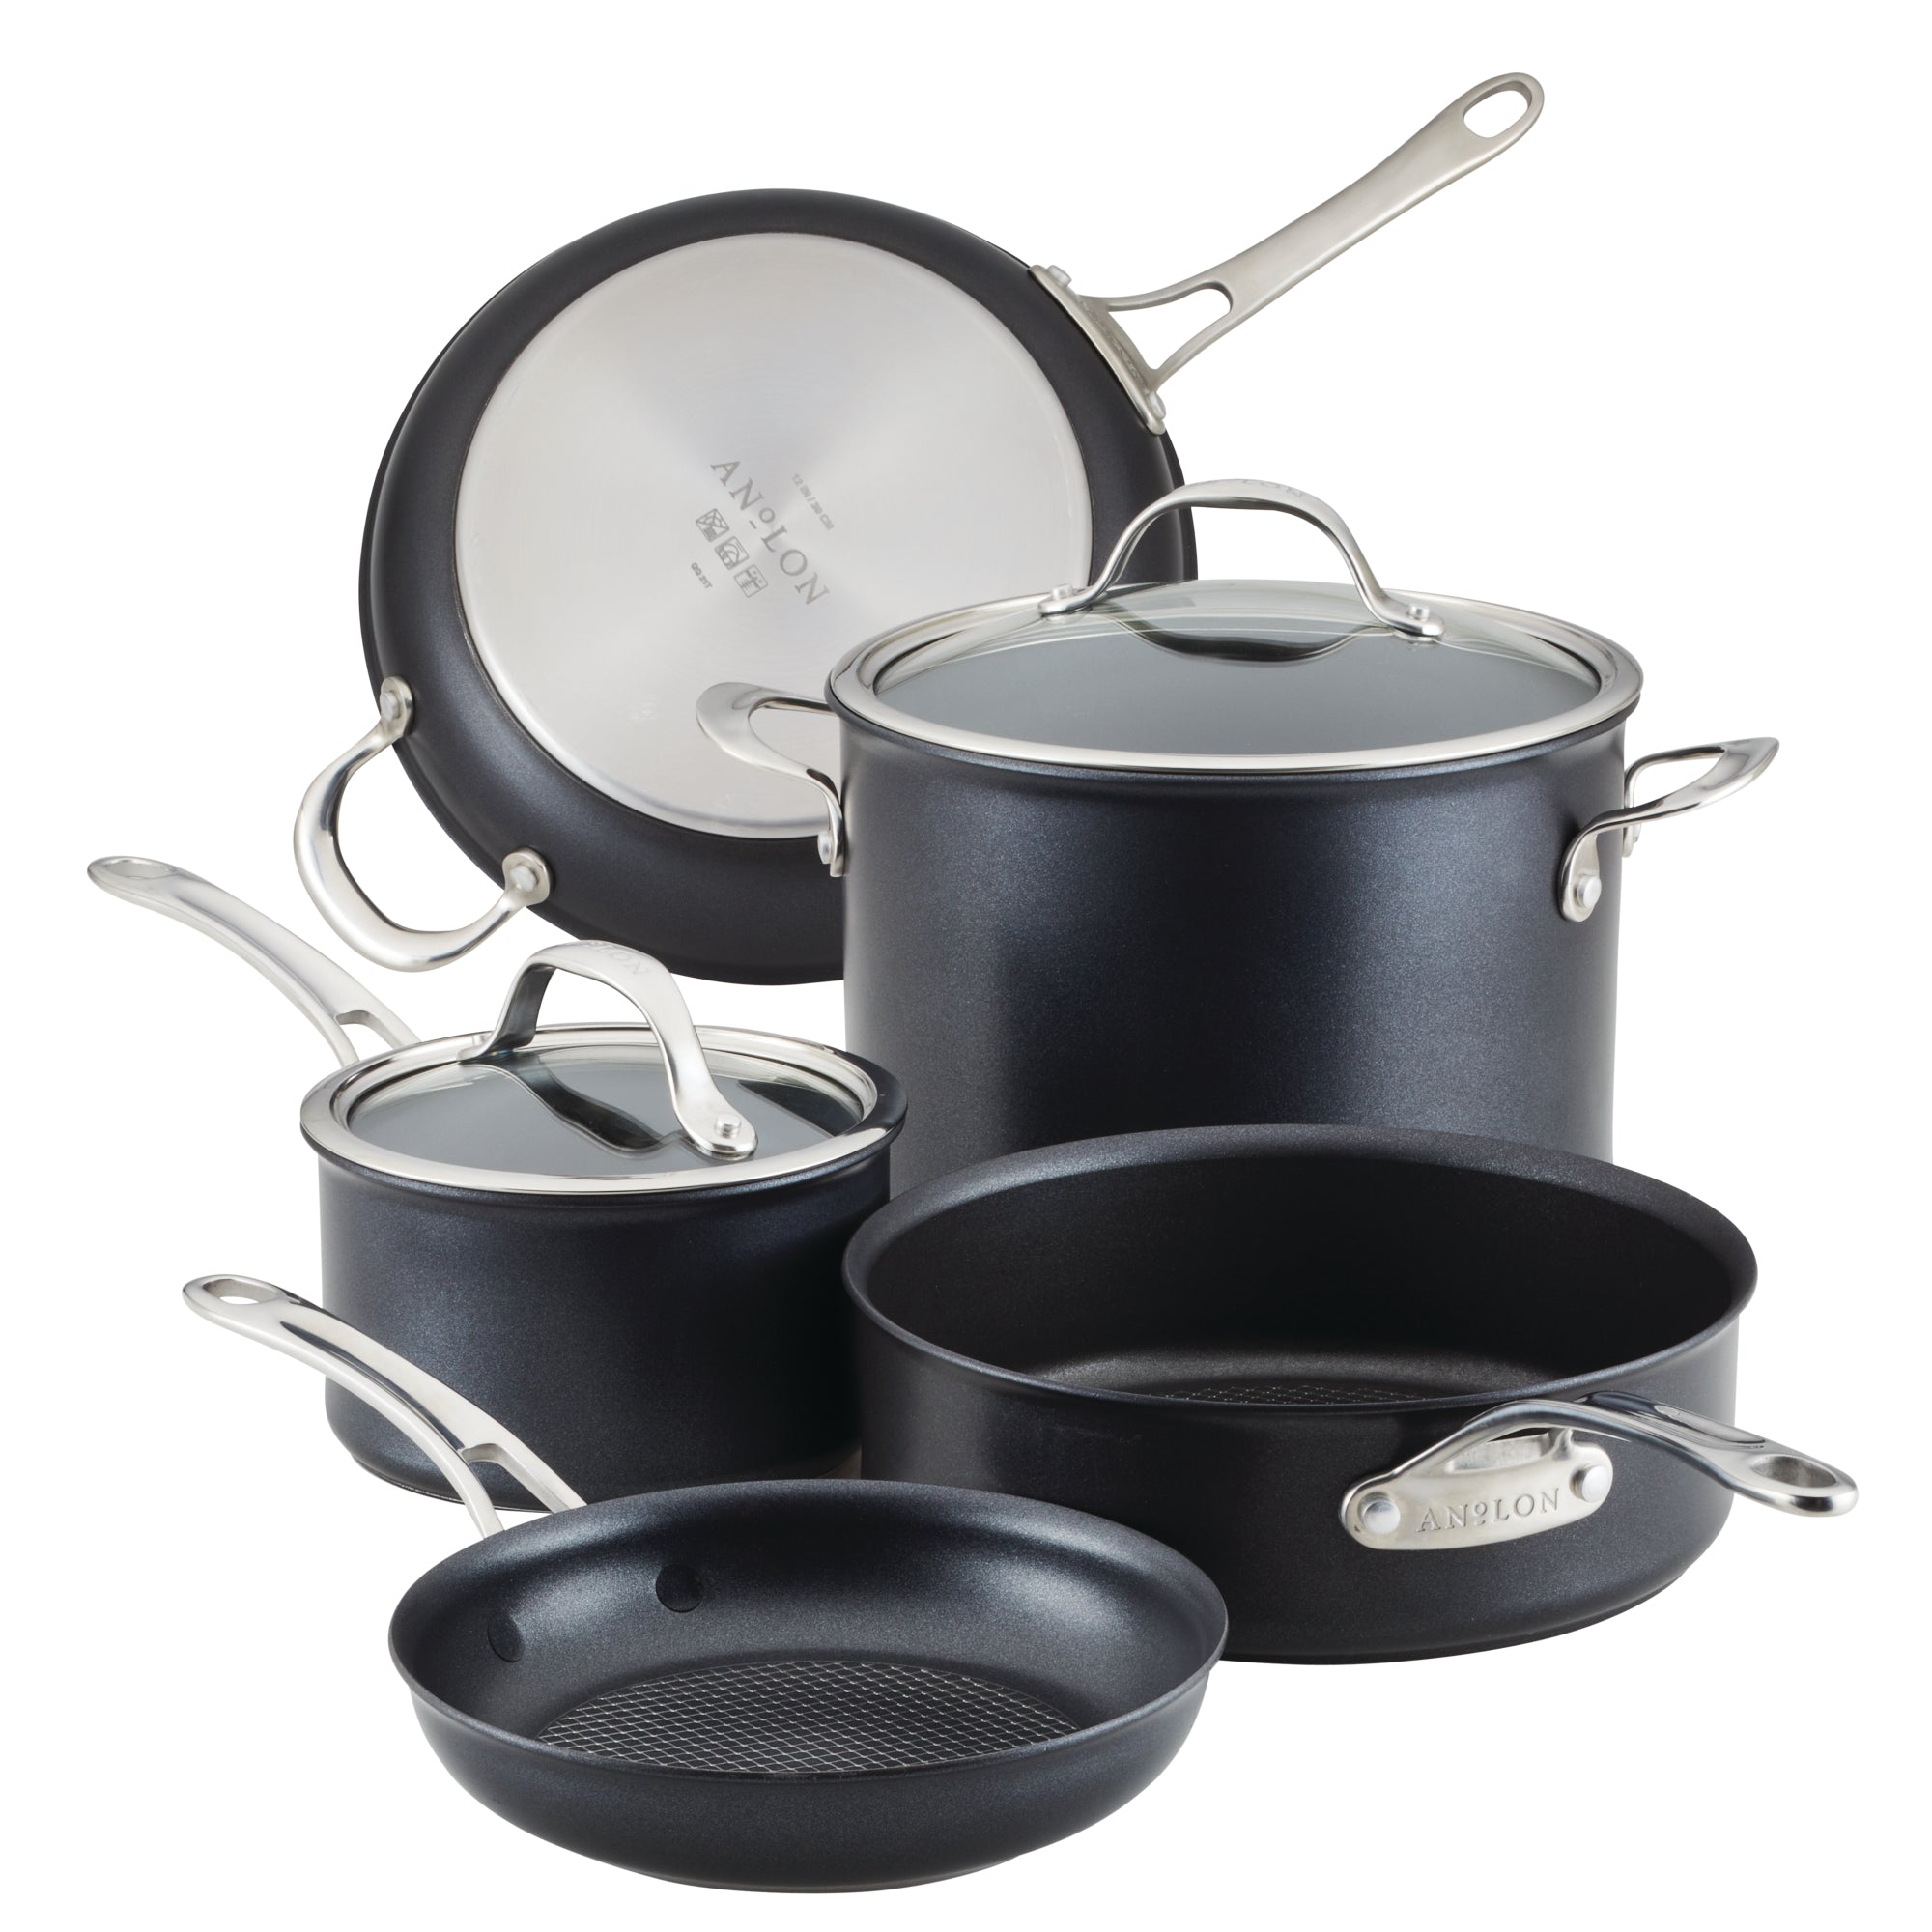 HexClad 4-Piece Hybrid Nonstick Cookware Set, 8 and 10 Inch Frying Pan and  14 Inch Wok with Lid, Dishwasher and Oven Safe, Works on All Cooktops